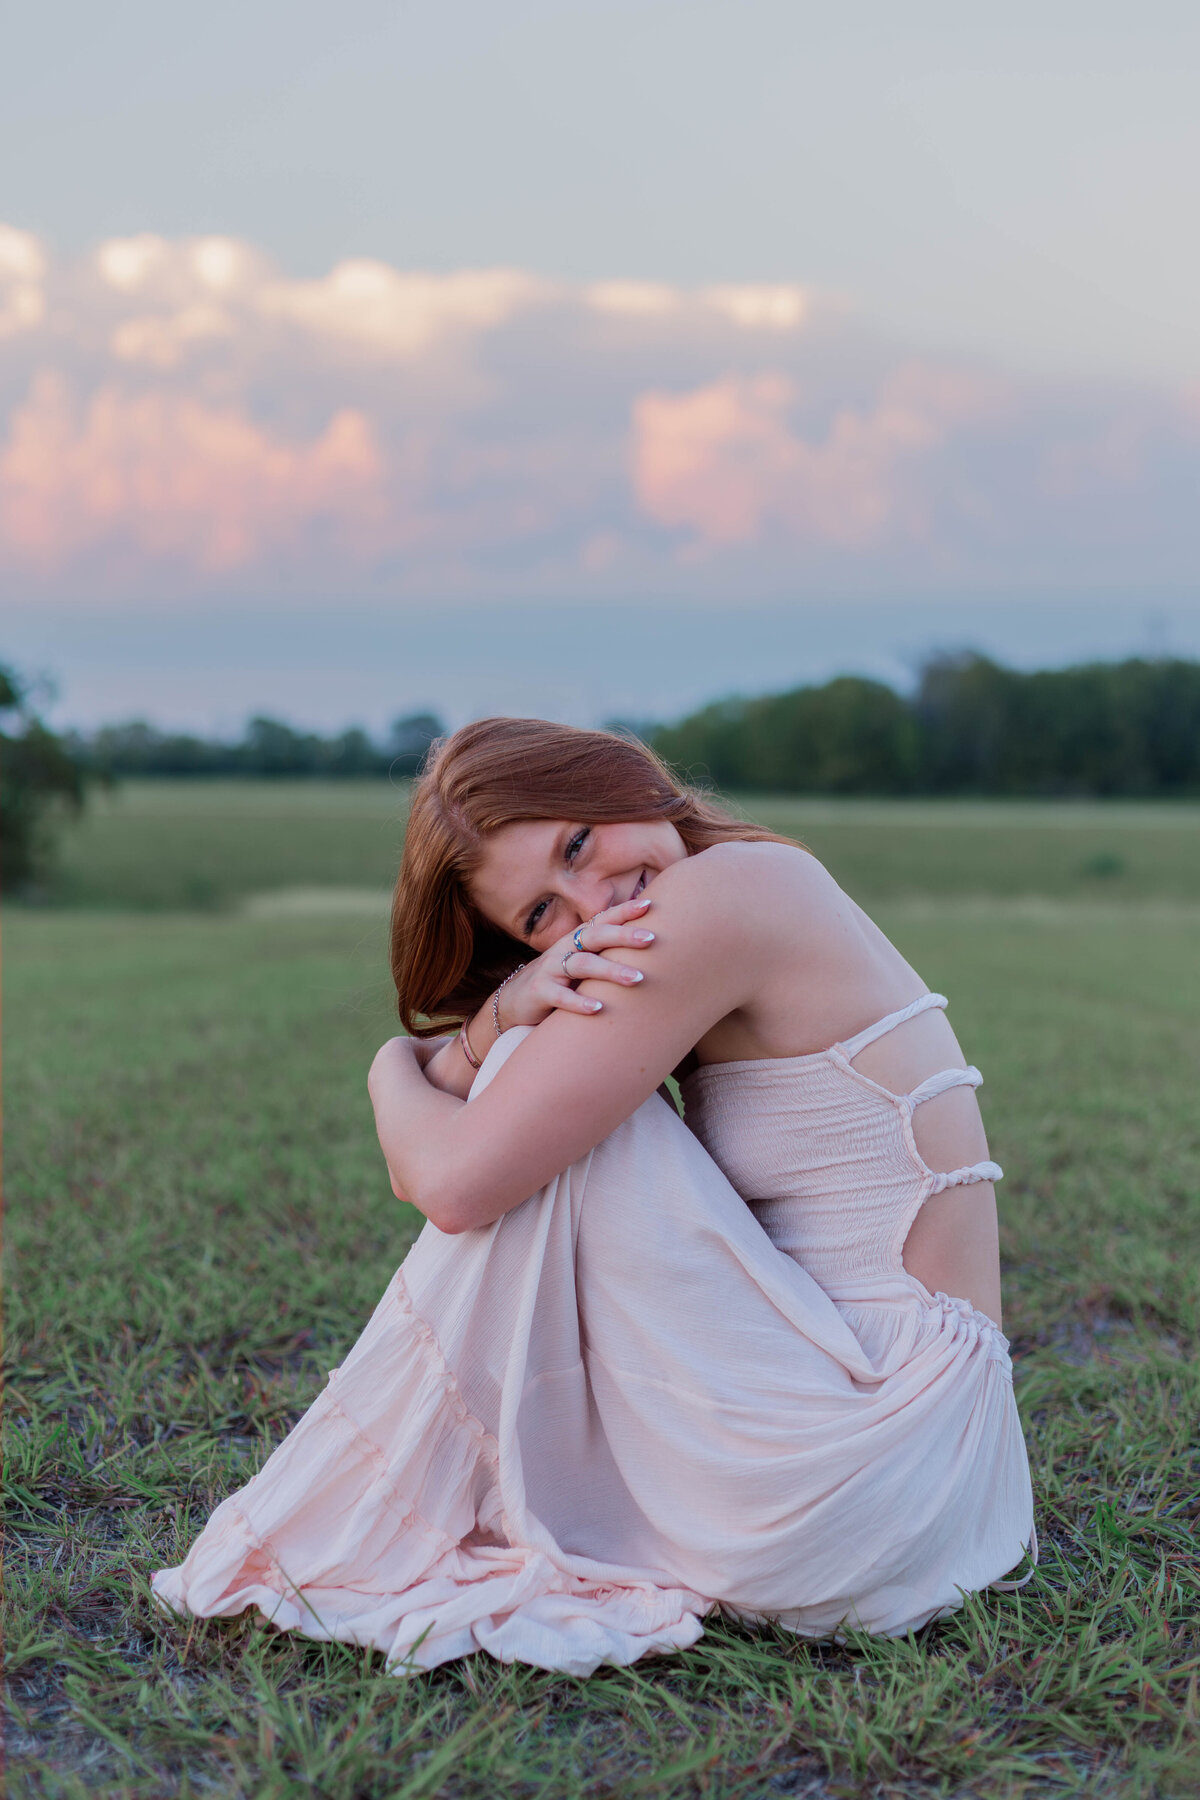 A shy girl smiles as she sits on the ground hugging her knees in a field at sunset